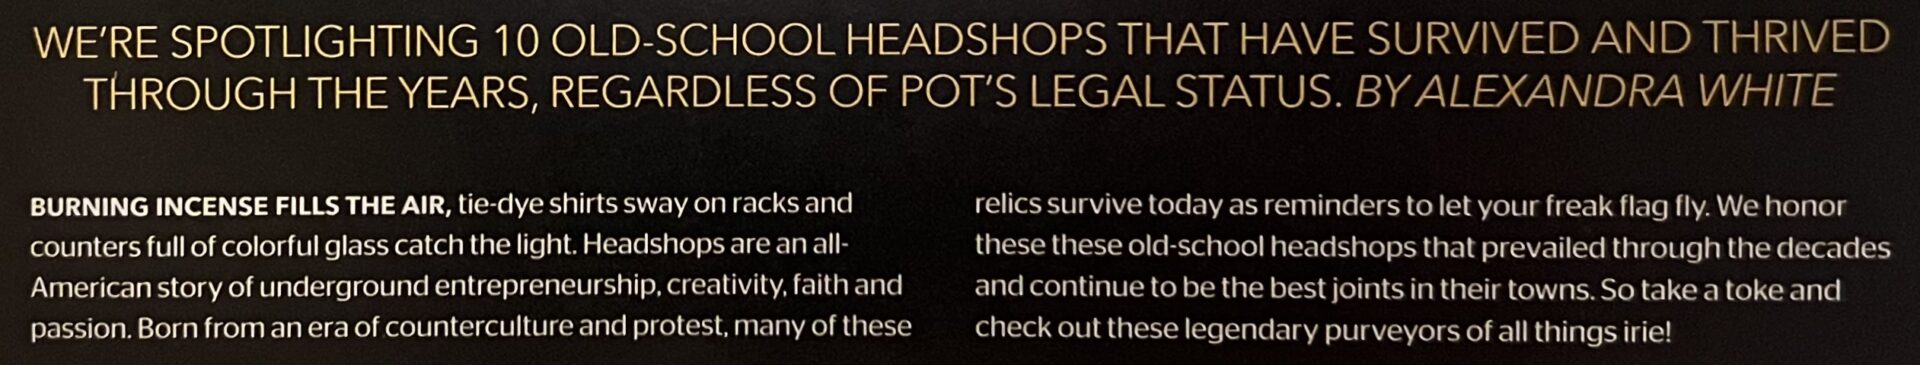 article in high times magazine about long-time headshops